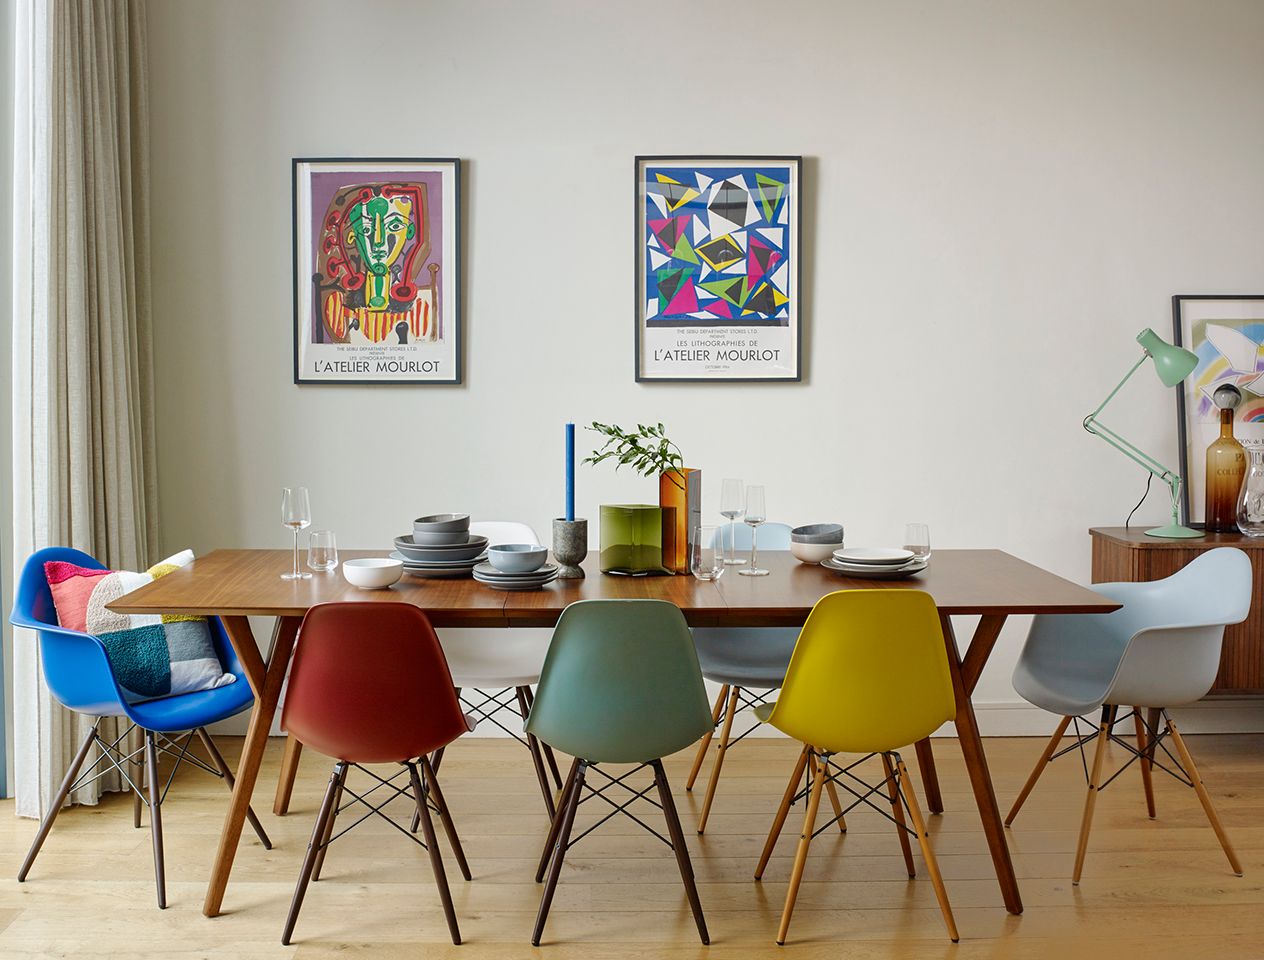 Vitra table with chairs